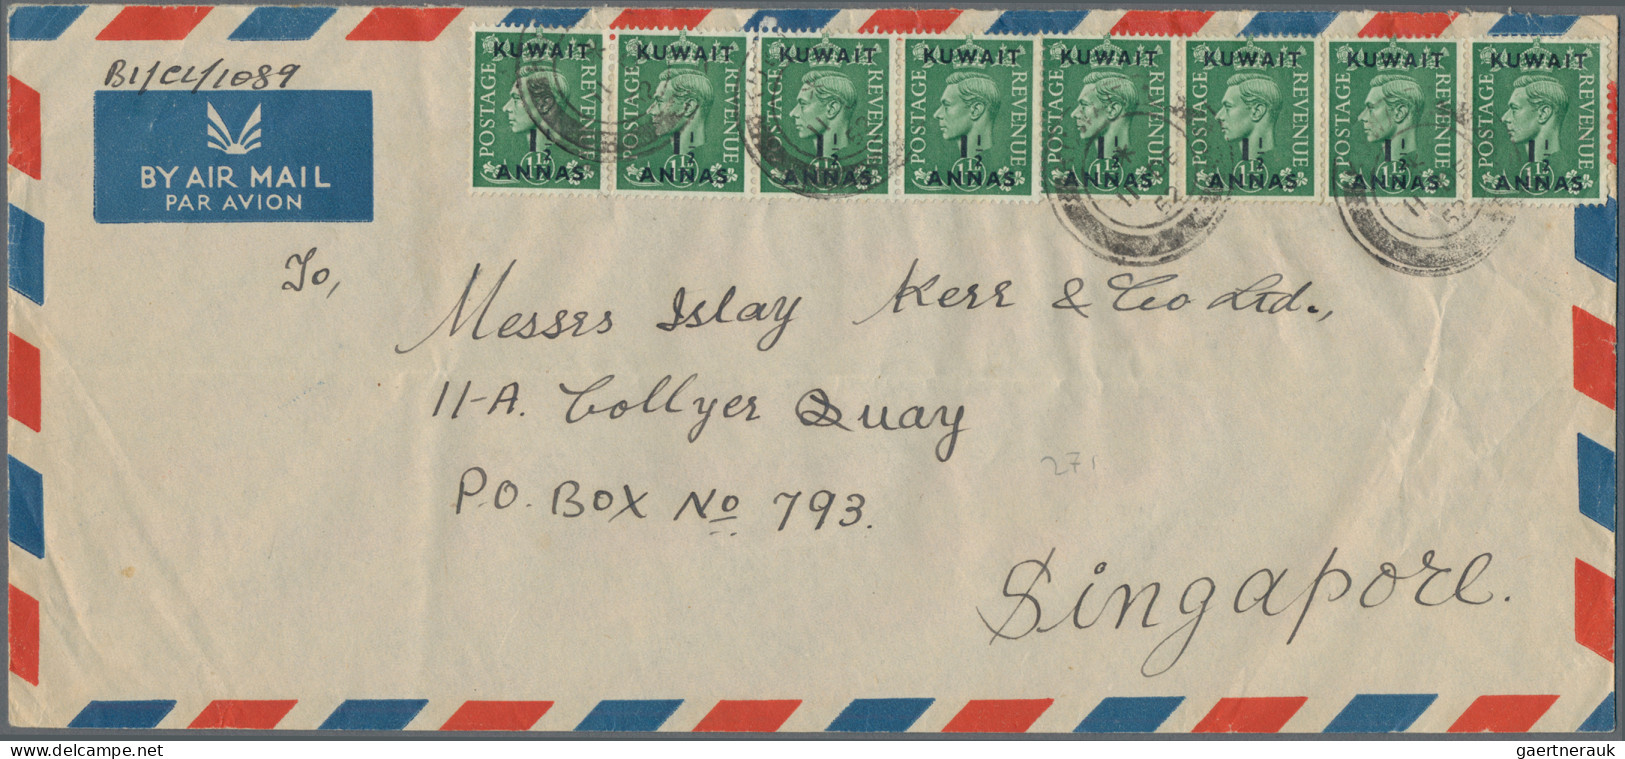 Kuwait: 1952 Air Mail Envelope To Singapore Franked By 8 (two Strips Of Four) KG - Kuwait